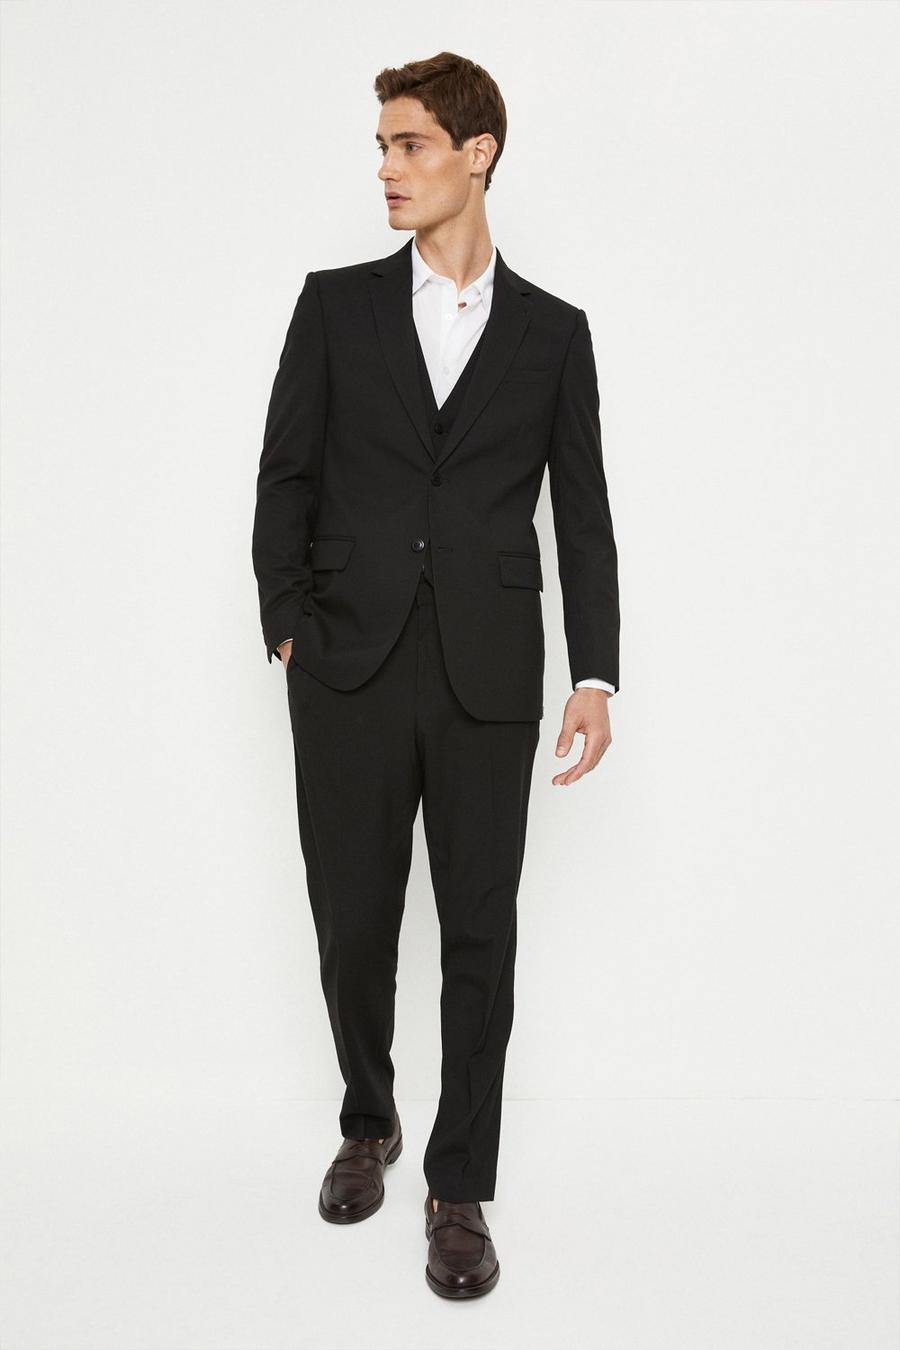 Plus And Tall Tailored Black Suit Trousers